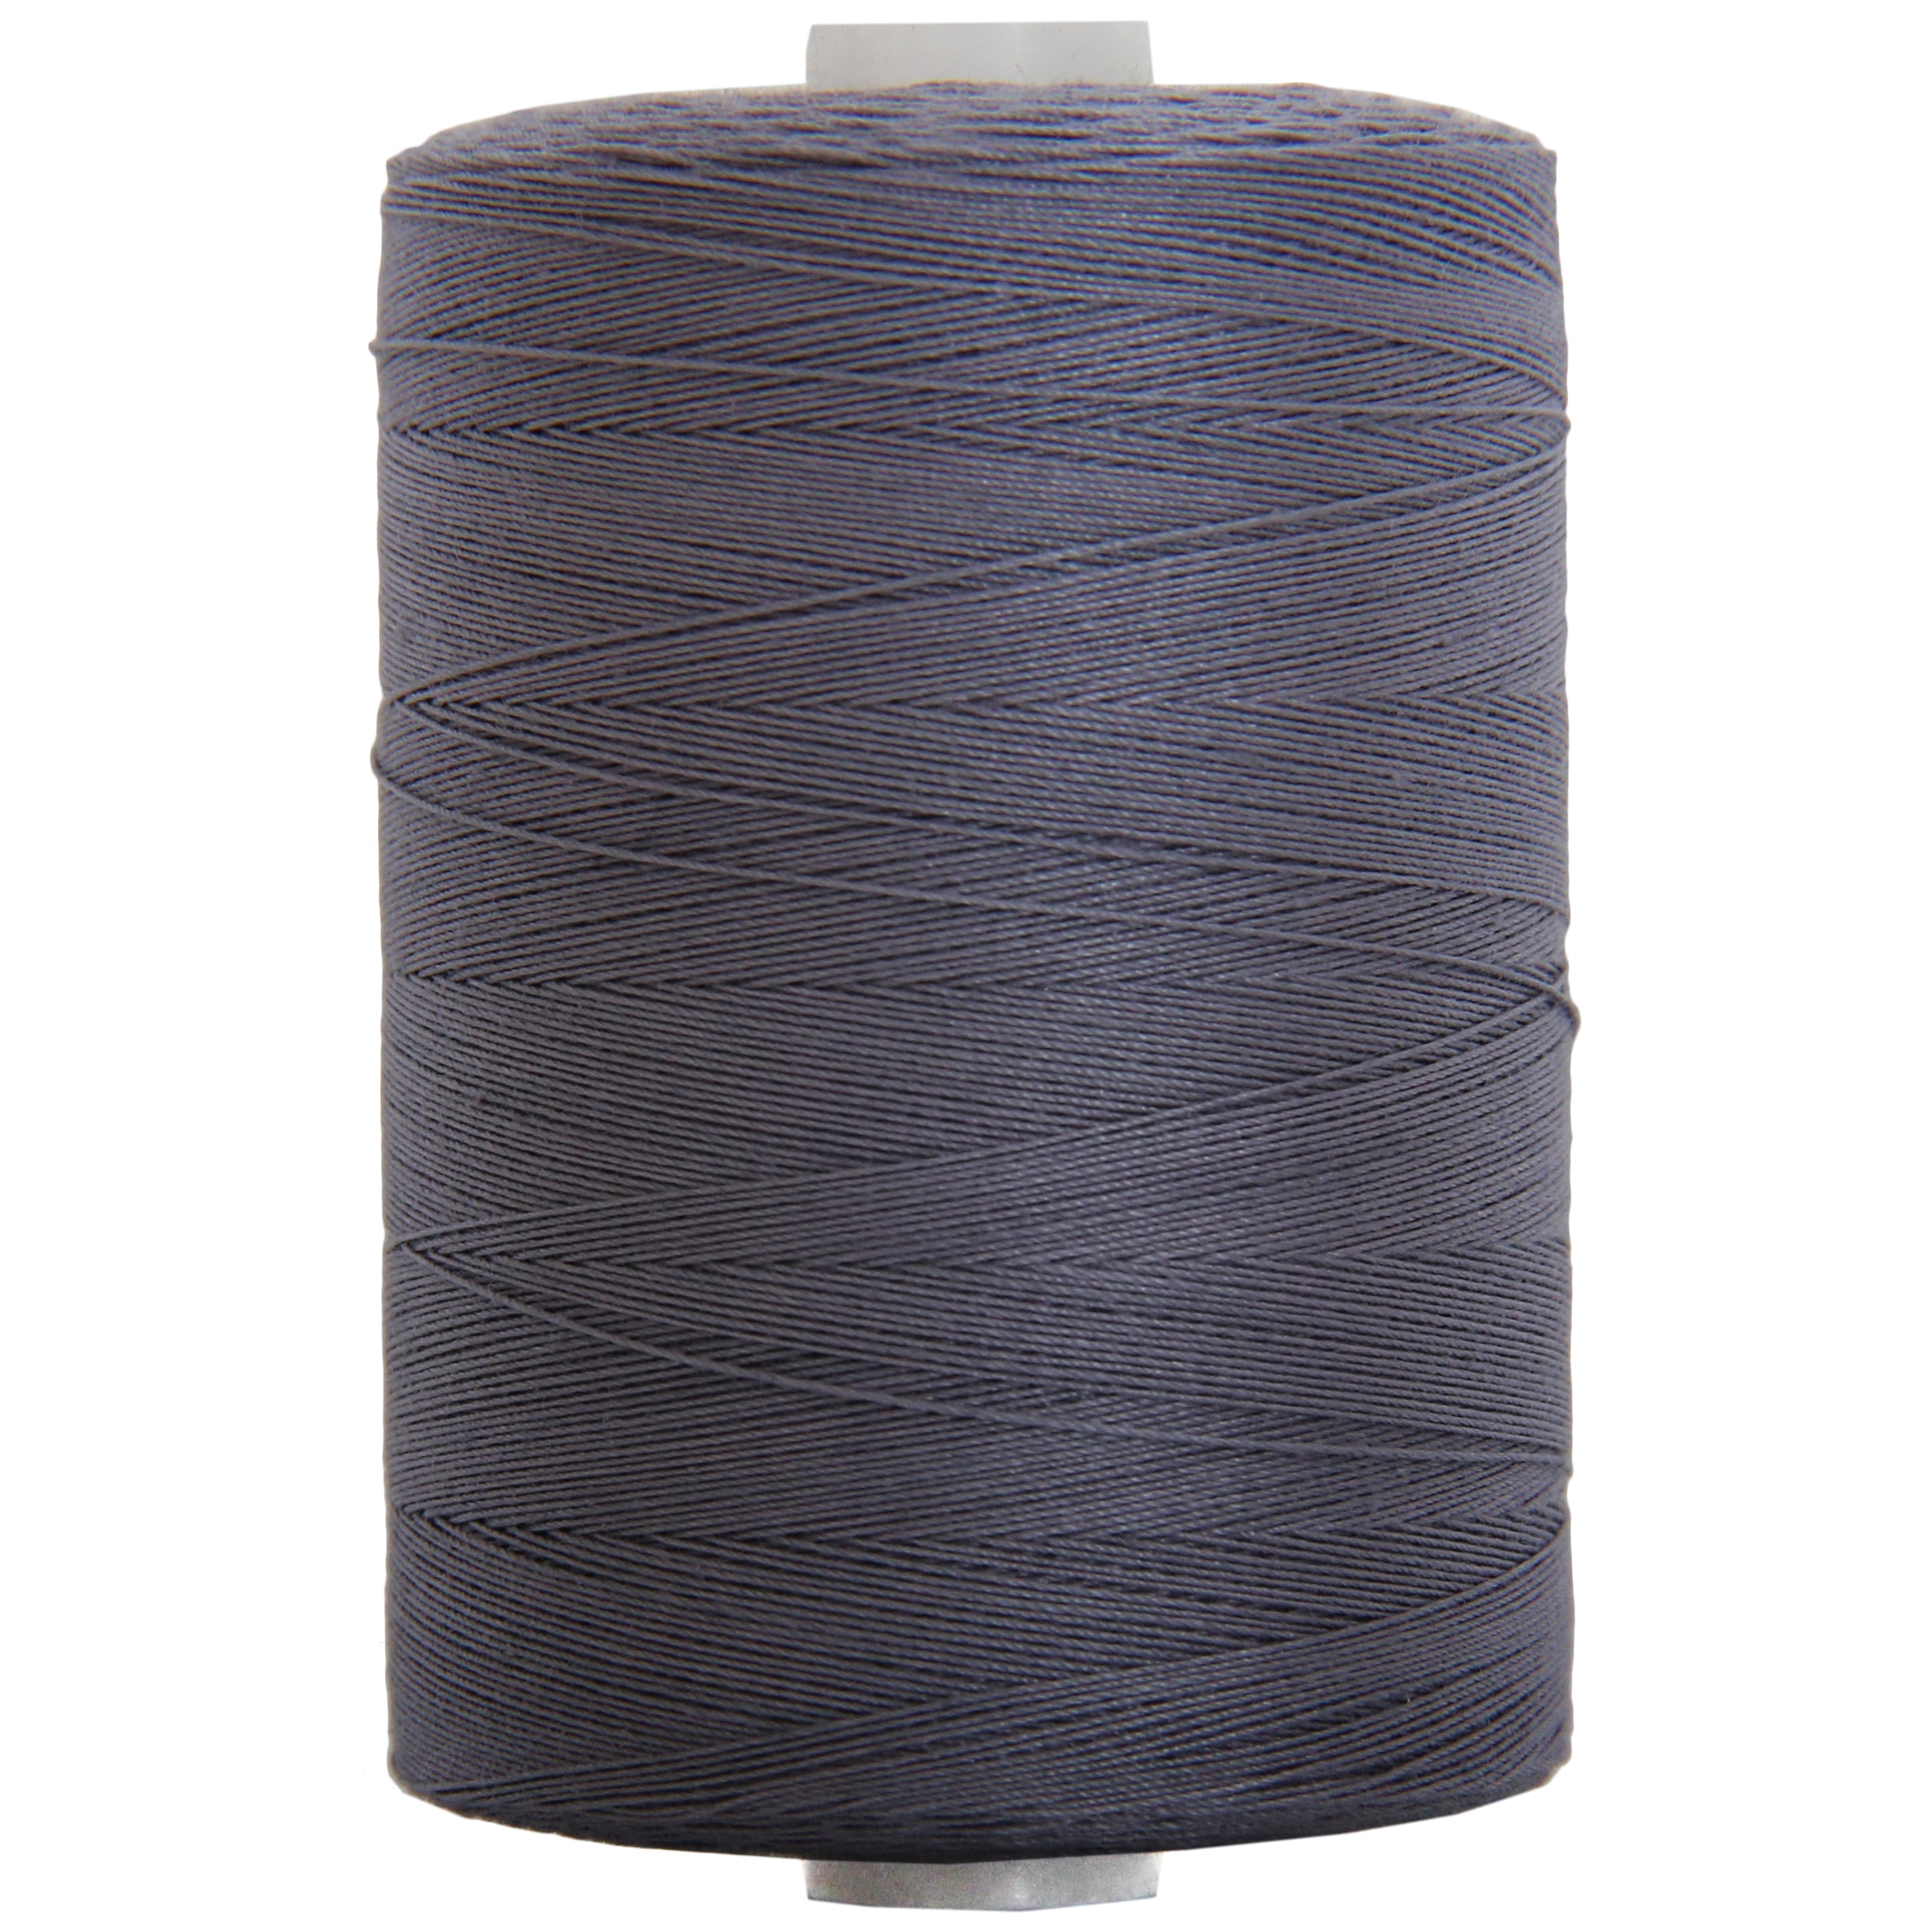 For Quilting Threadart 100% Cotton Thread and Serging 50 Colors Available 1000M Spools 50/3 Weight Color LT BLUE Sewing 